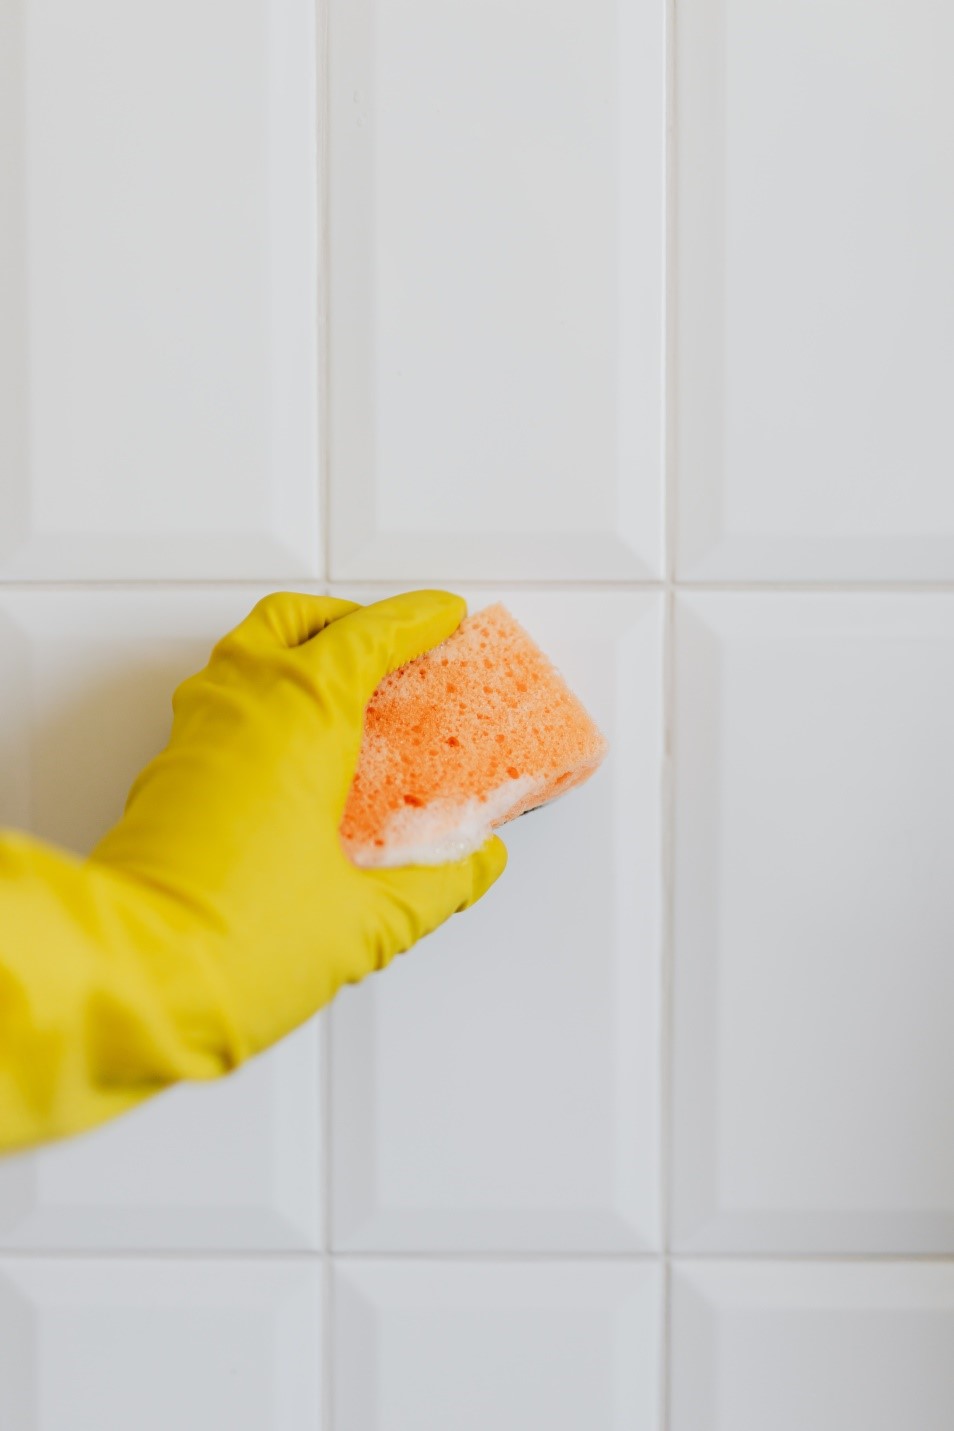 A professional cleaner wearing gloves while scrubbing mold off the tiles